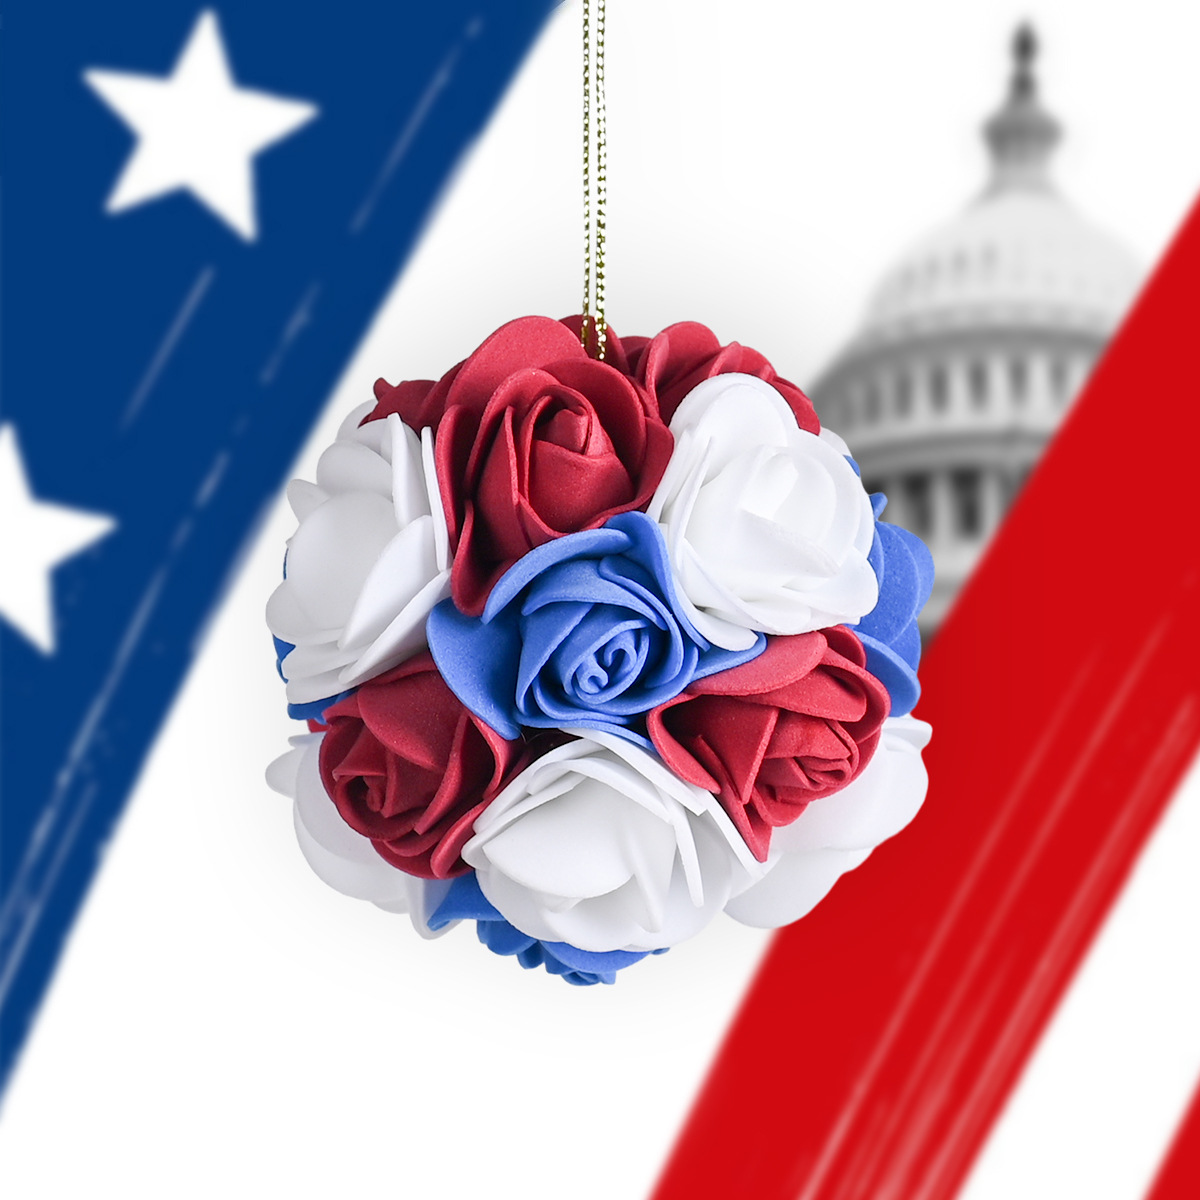 independence day floral ball american independence day holiday supplies garland pendant decorations foamflower artificial flower artware